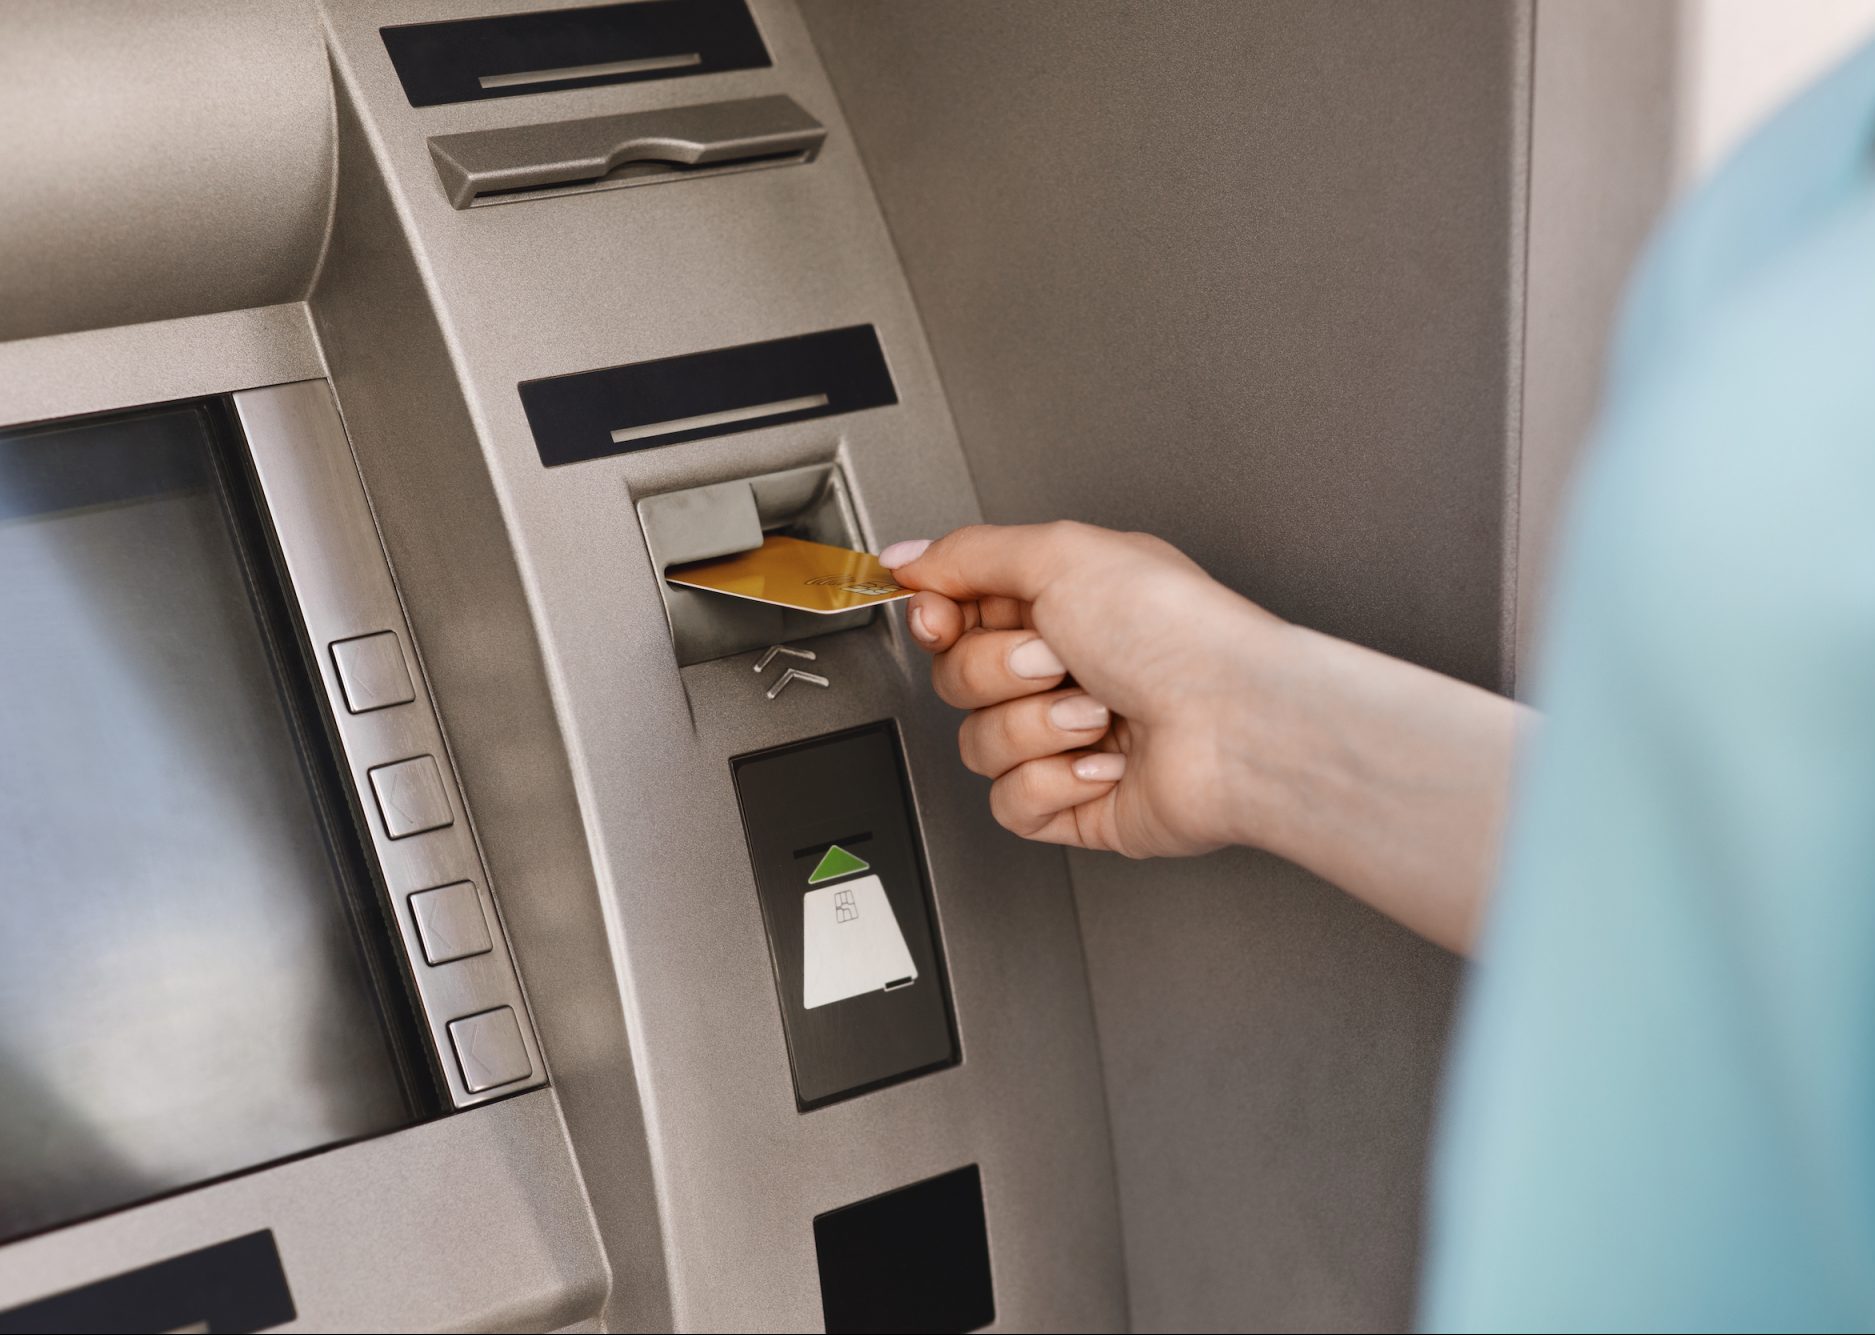 New Currency in Circulation can be withdrawn from ATMs